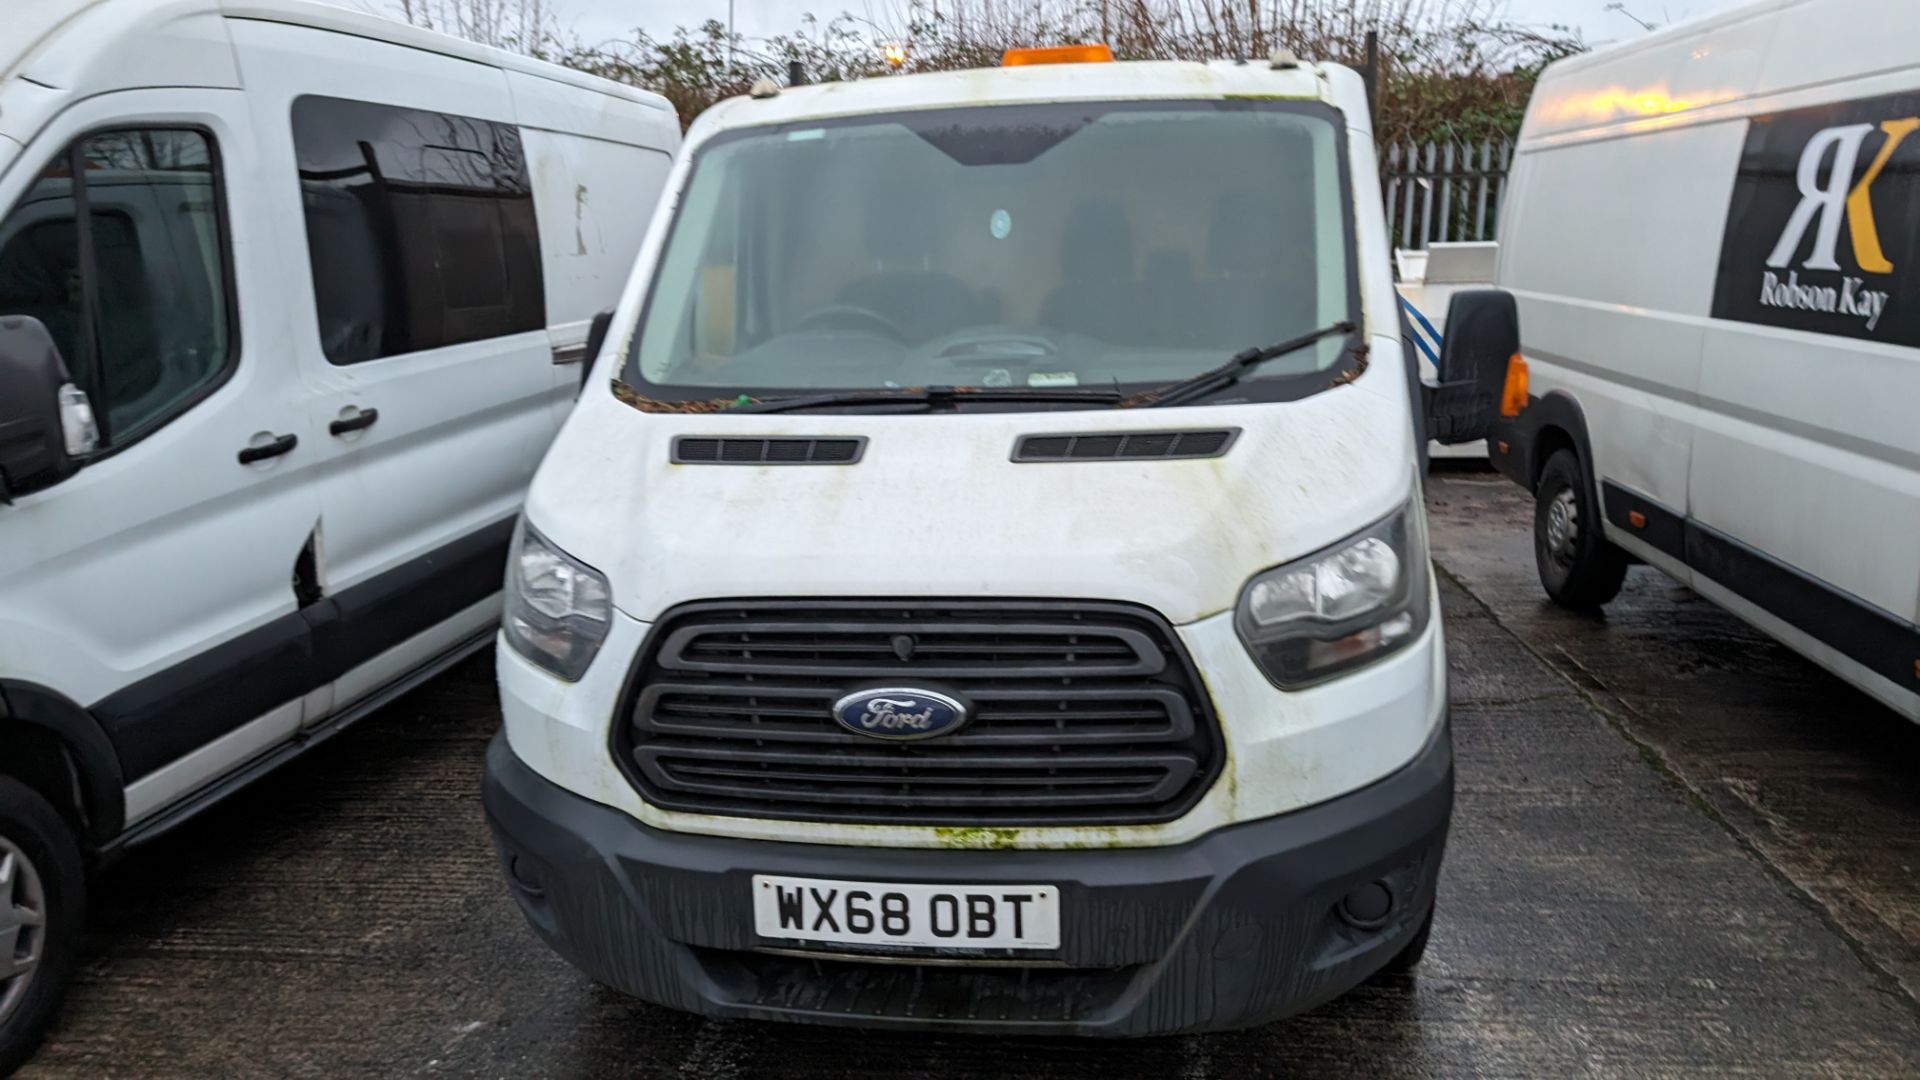 WX68 OBT Ford Transit 350 tipper, 6 speed manual gearbox, 1995cc diesel engine. Colour: White. Fi - Image 3 of 24